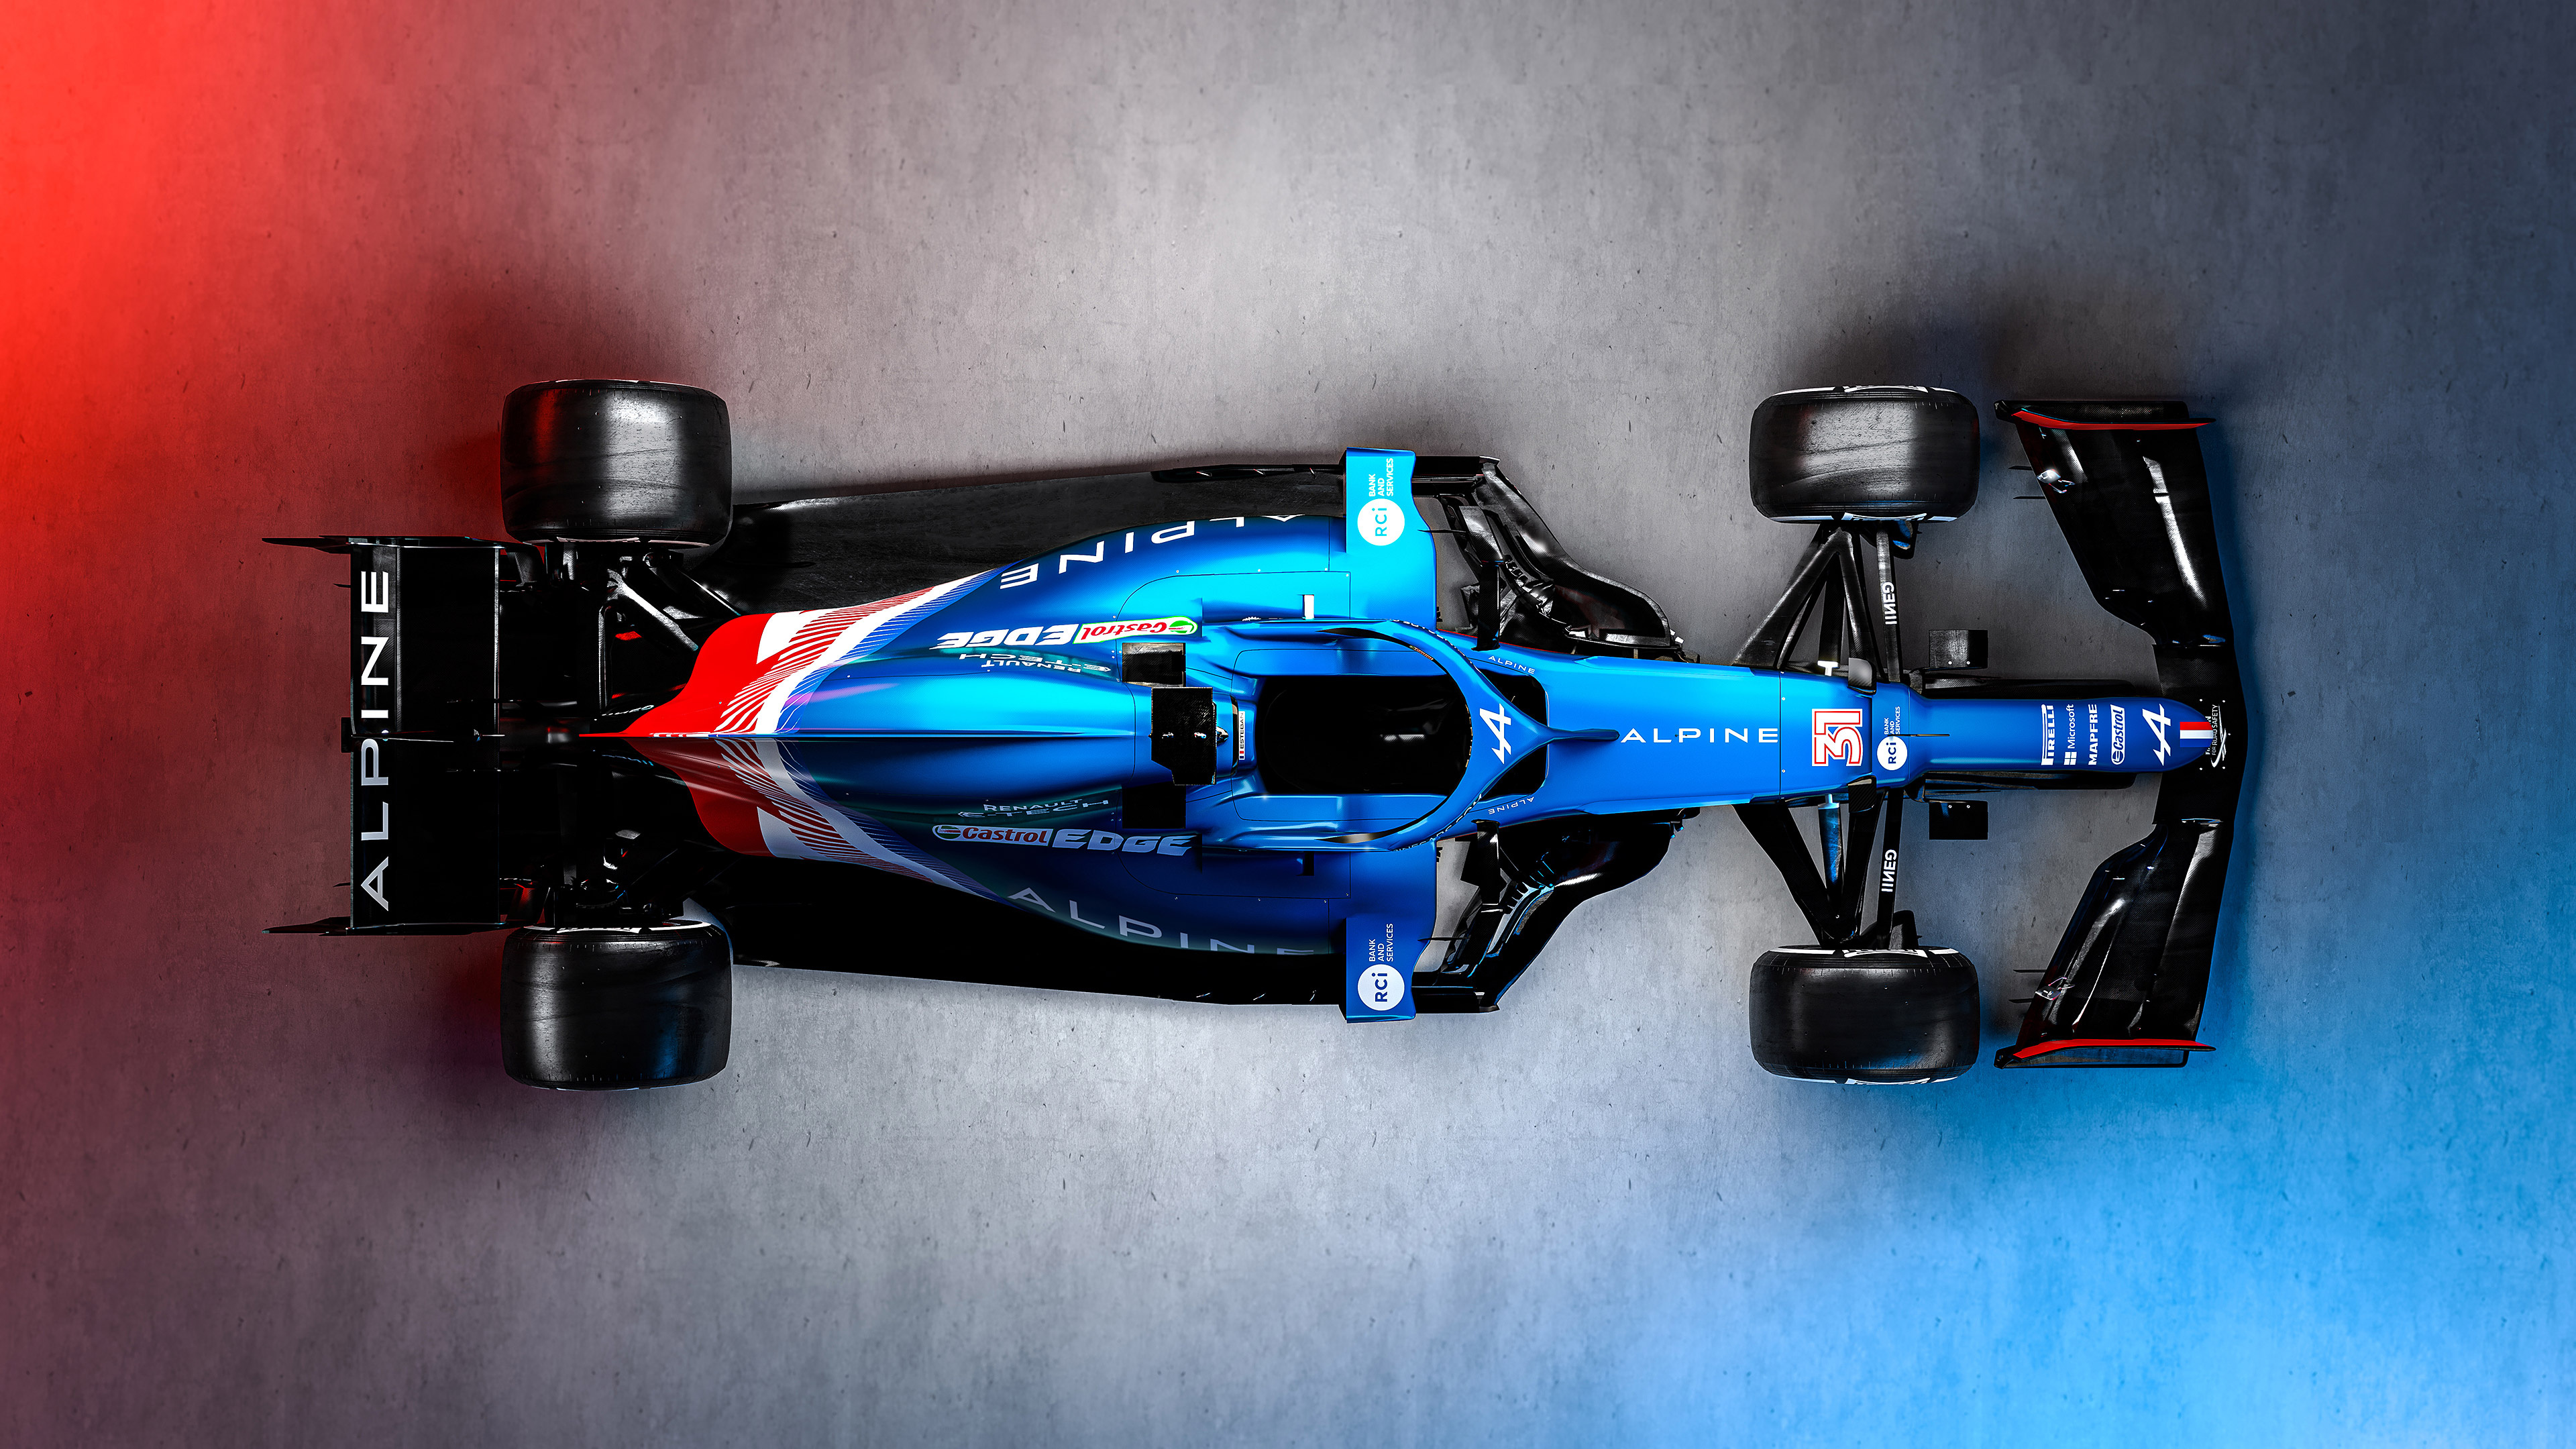 Formula 1: Modern-day F1 cars, Constructed from composites of carbon fiber and similar ultra-lightweight materials. 3840x2160 4K Background.